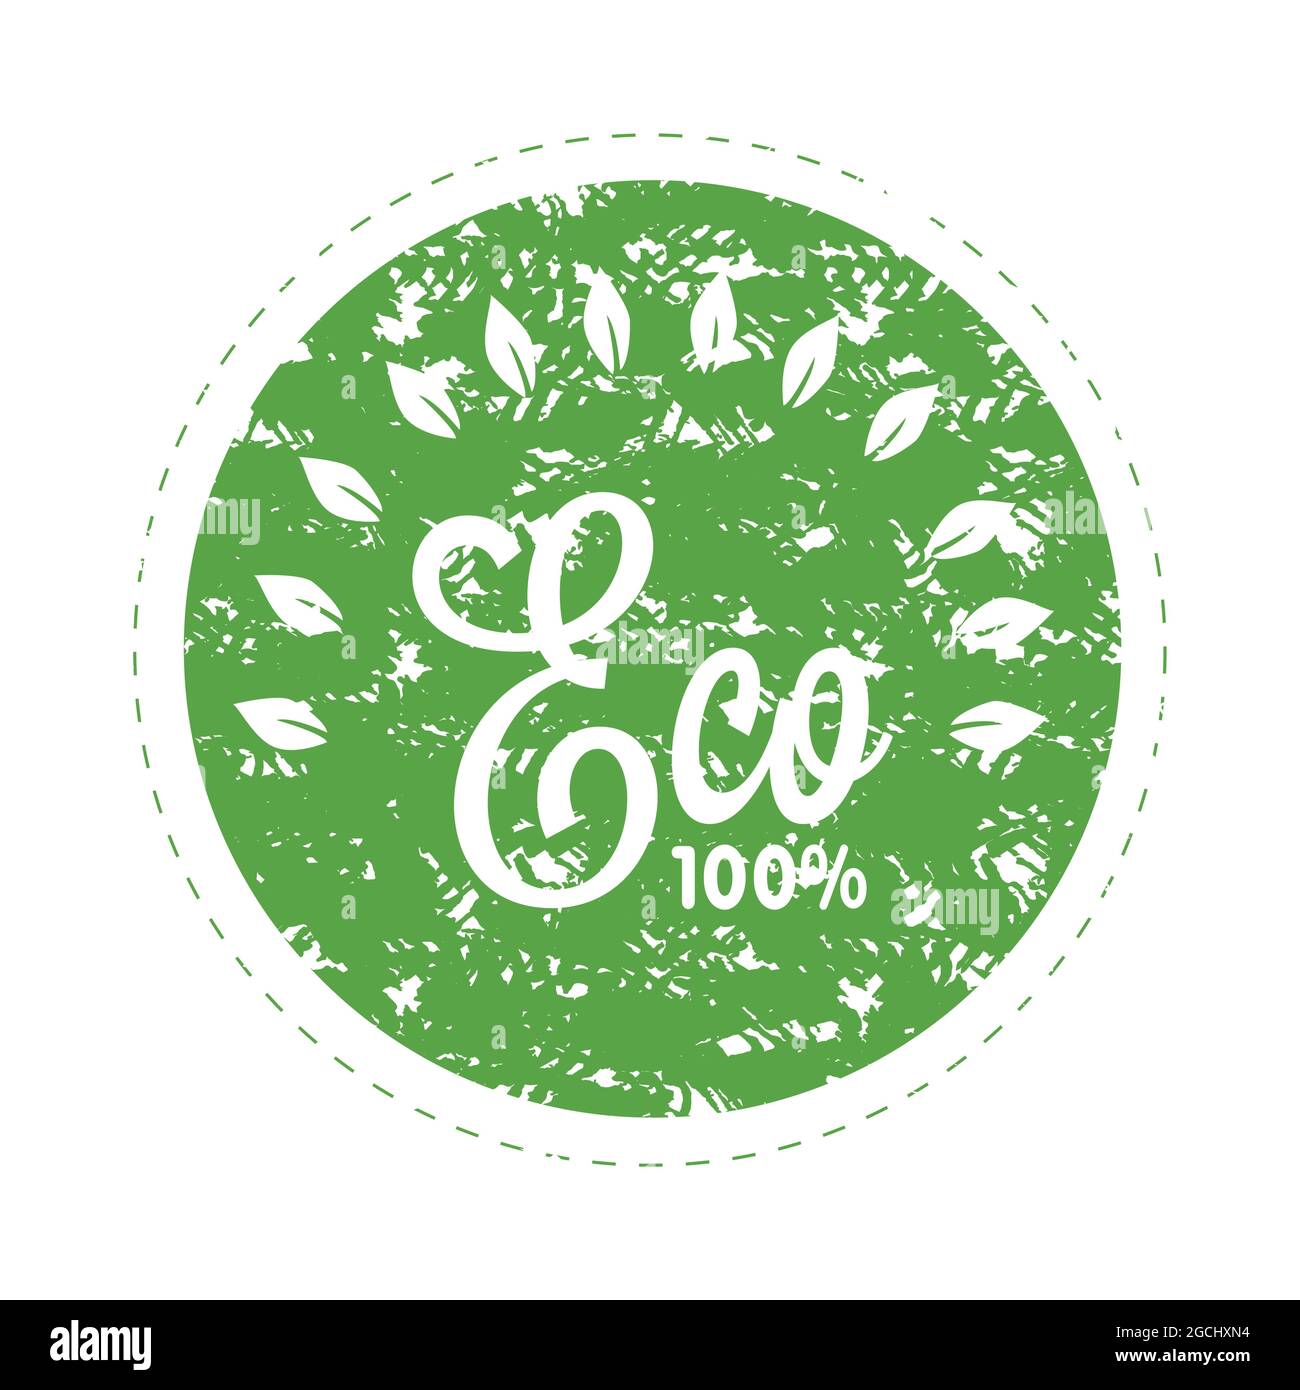 Warranty eco product texture of seal print. Vector natural warranty and ecological friendly rubber stamp element illustration Stock Vector